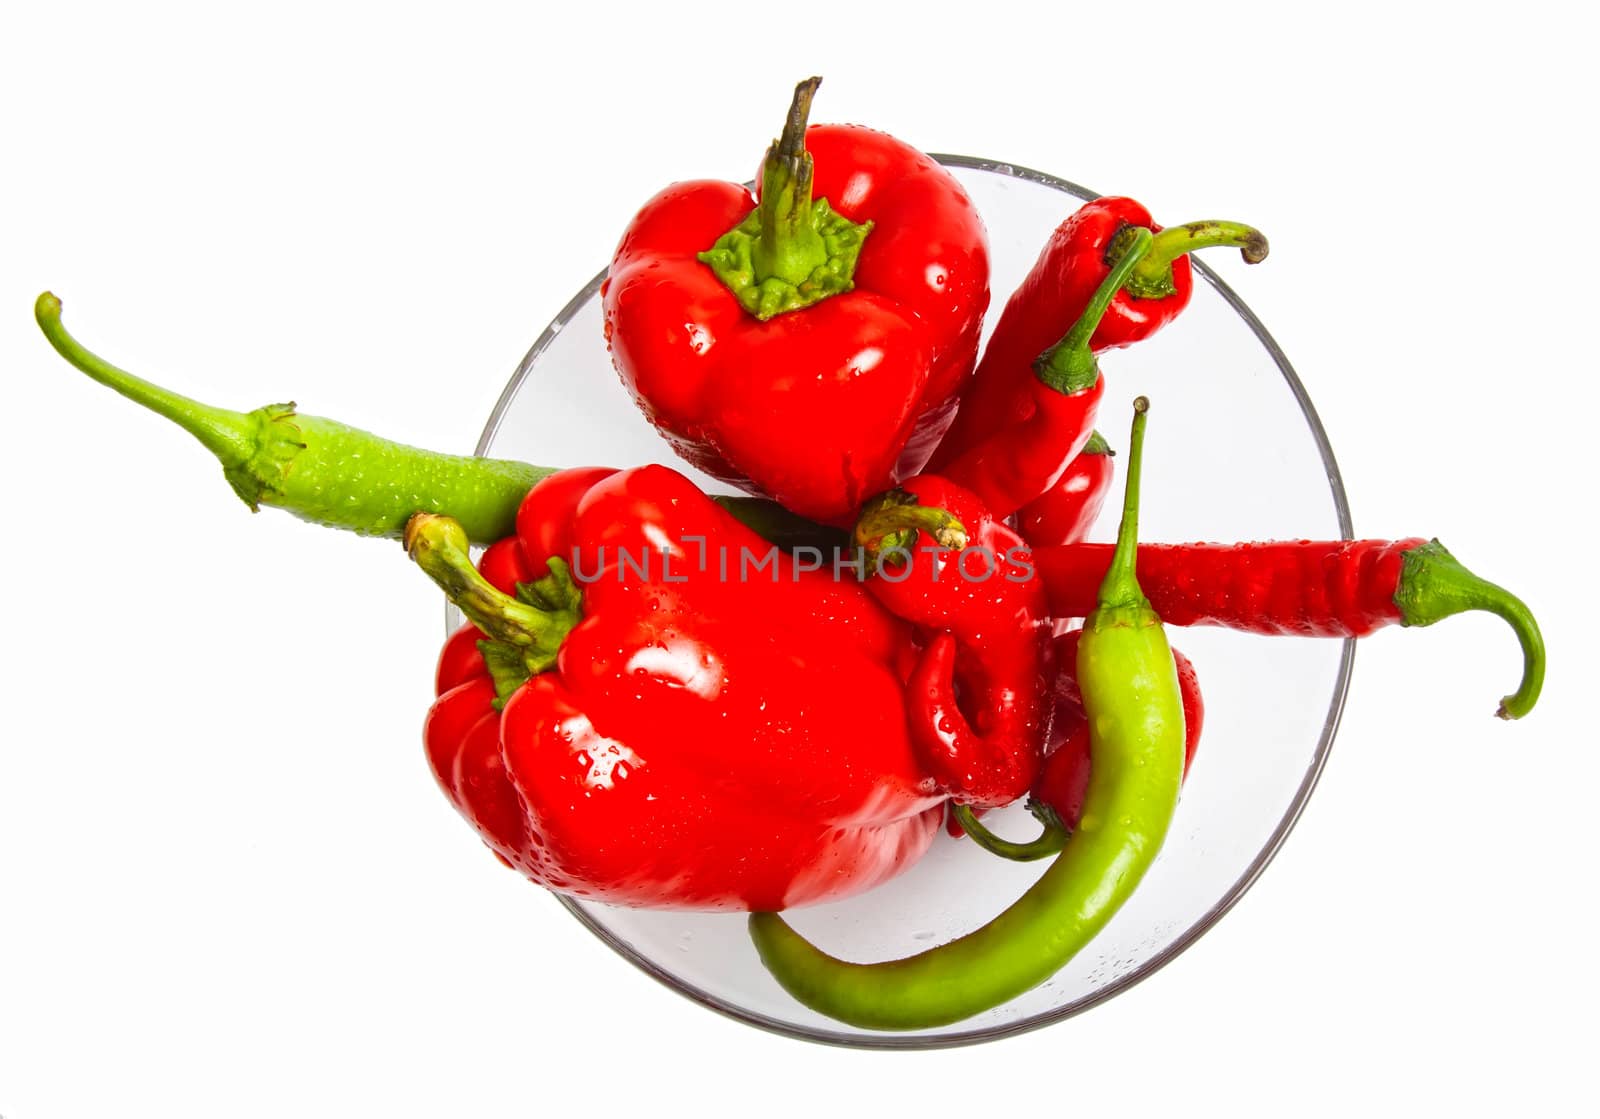 Red and green pepper composition in salad dish